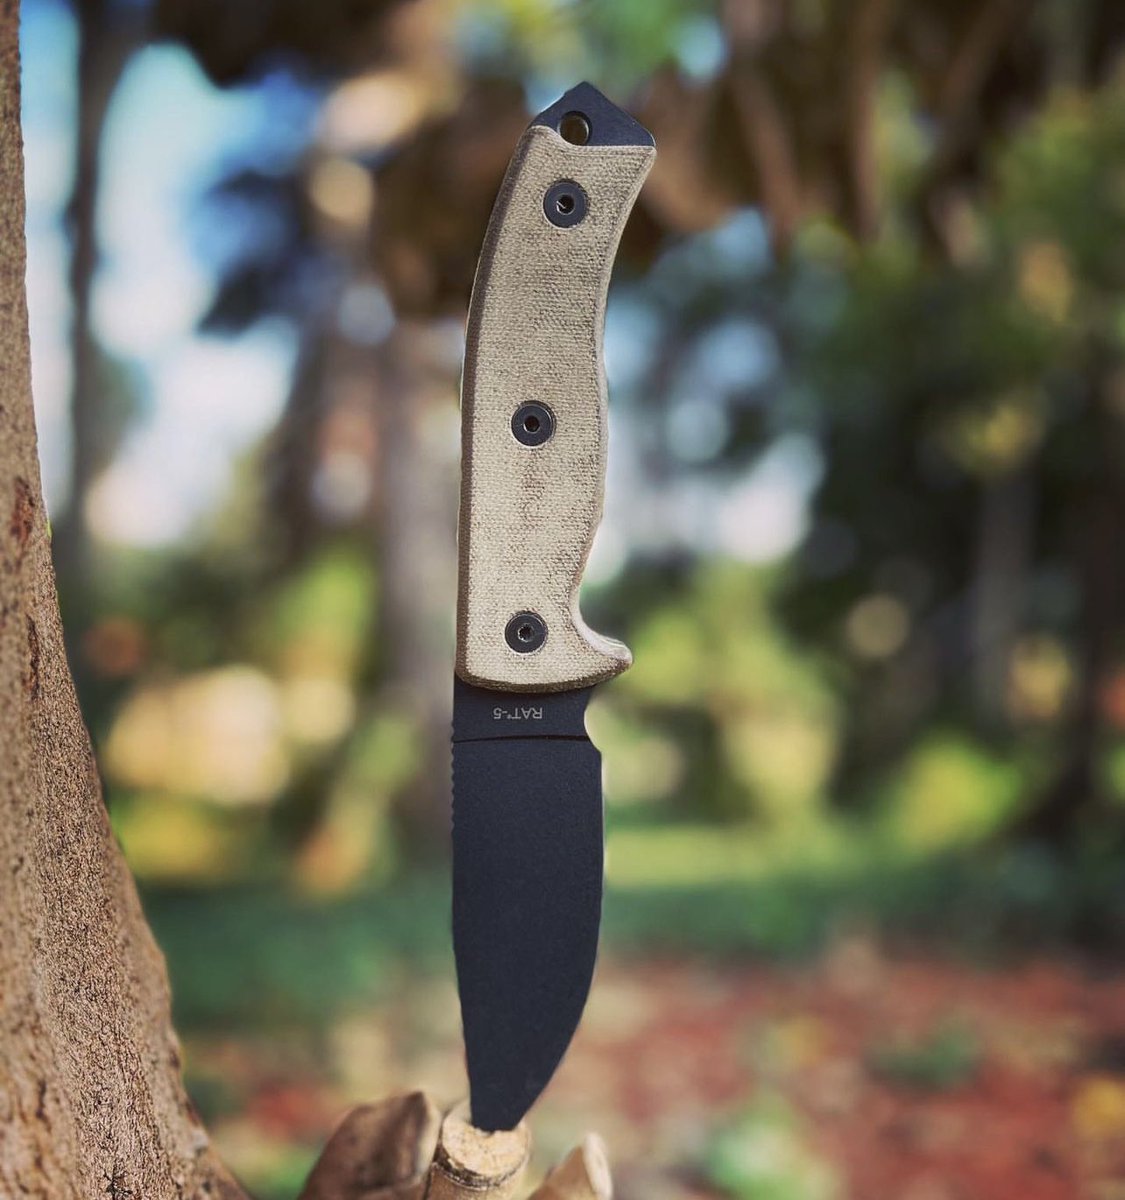 The #RAT5 travels well for a mid size tool! The #1095steel and #MicartaHandles are ultra durable! 👌🏽🔪🐀 #LegacyAdventureExplore 
#ontarioknifecompany #ontarioknife #ontarioknives #ontarioknifeco #OKC1889  #hunting #camping #hiking #outdoors #tools #gear #quality #bushcraft